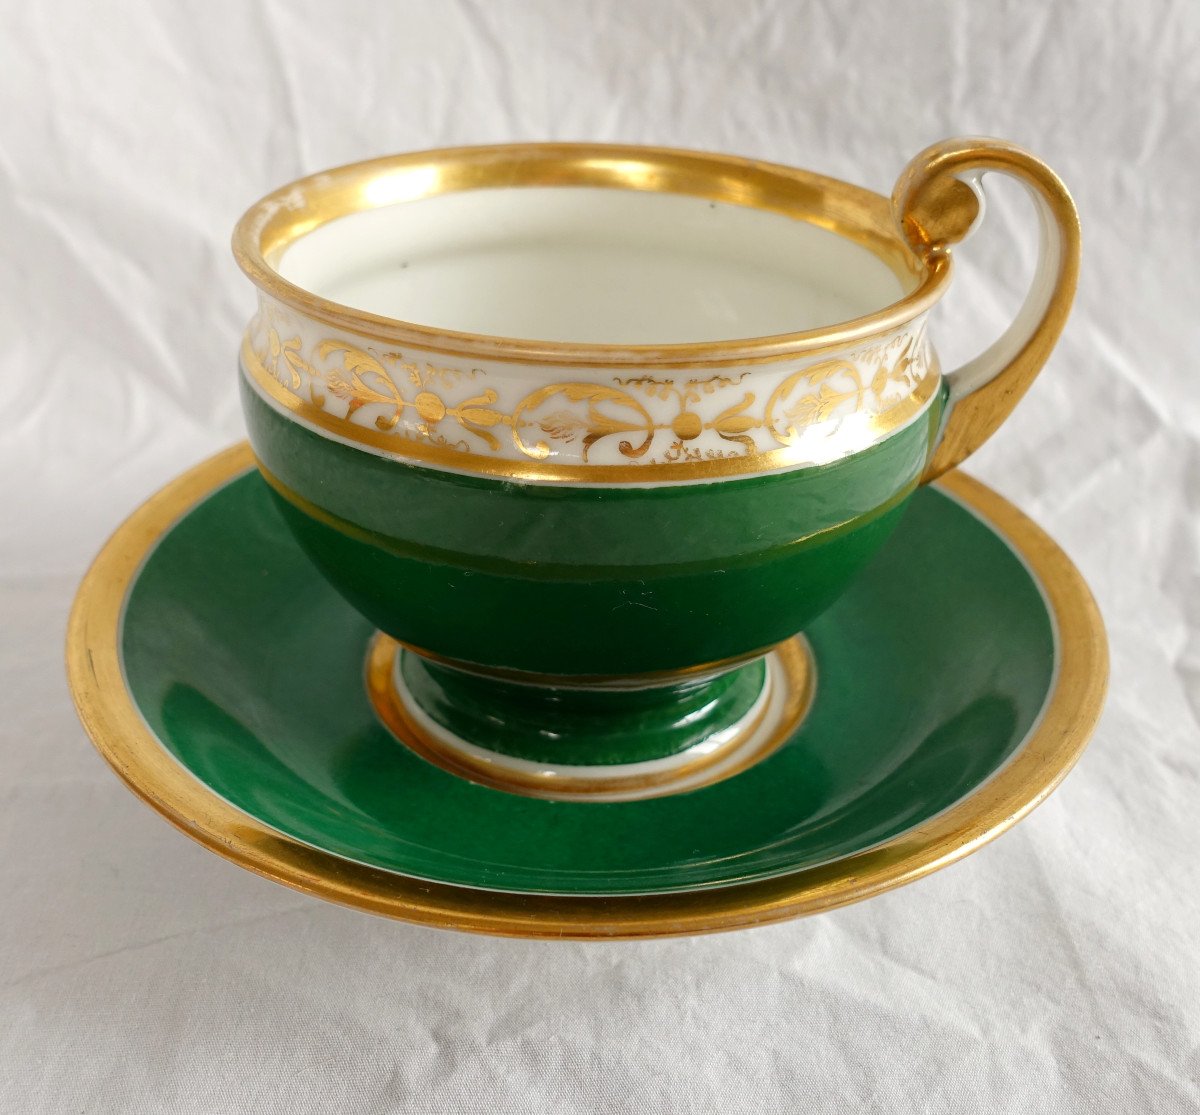 Large Chocolate Cup In Green And Gold Paris Porcelain, Empire Period, Attributed To Nast-photo-3